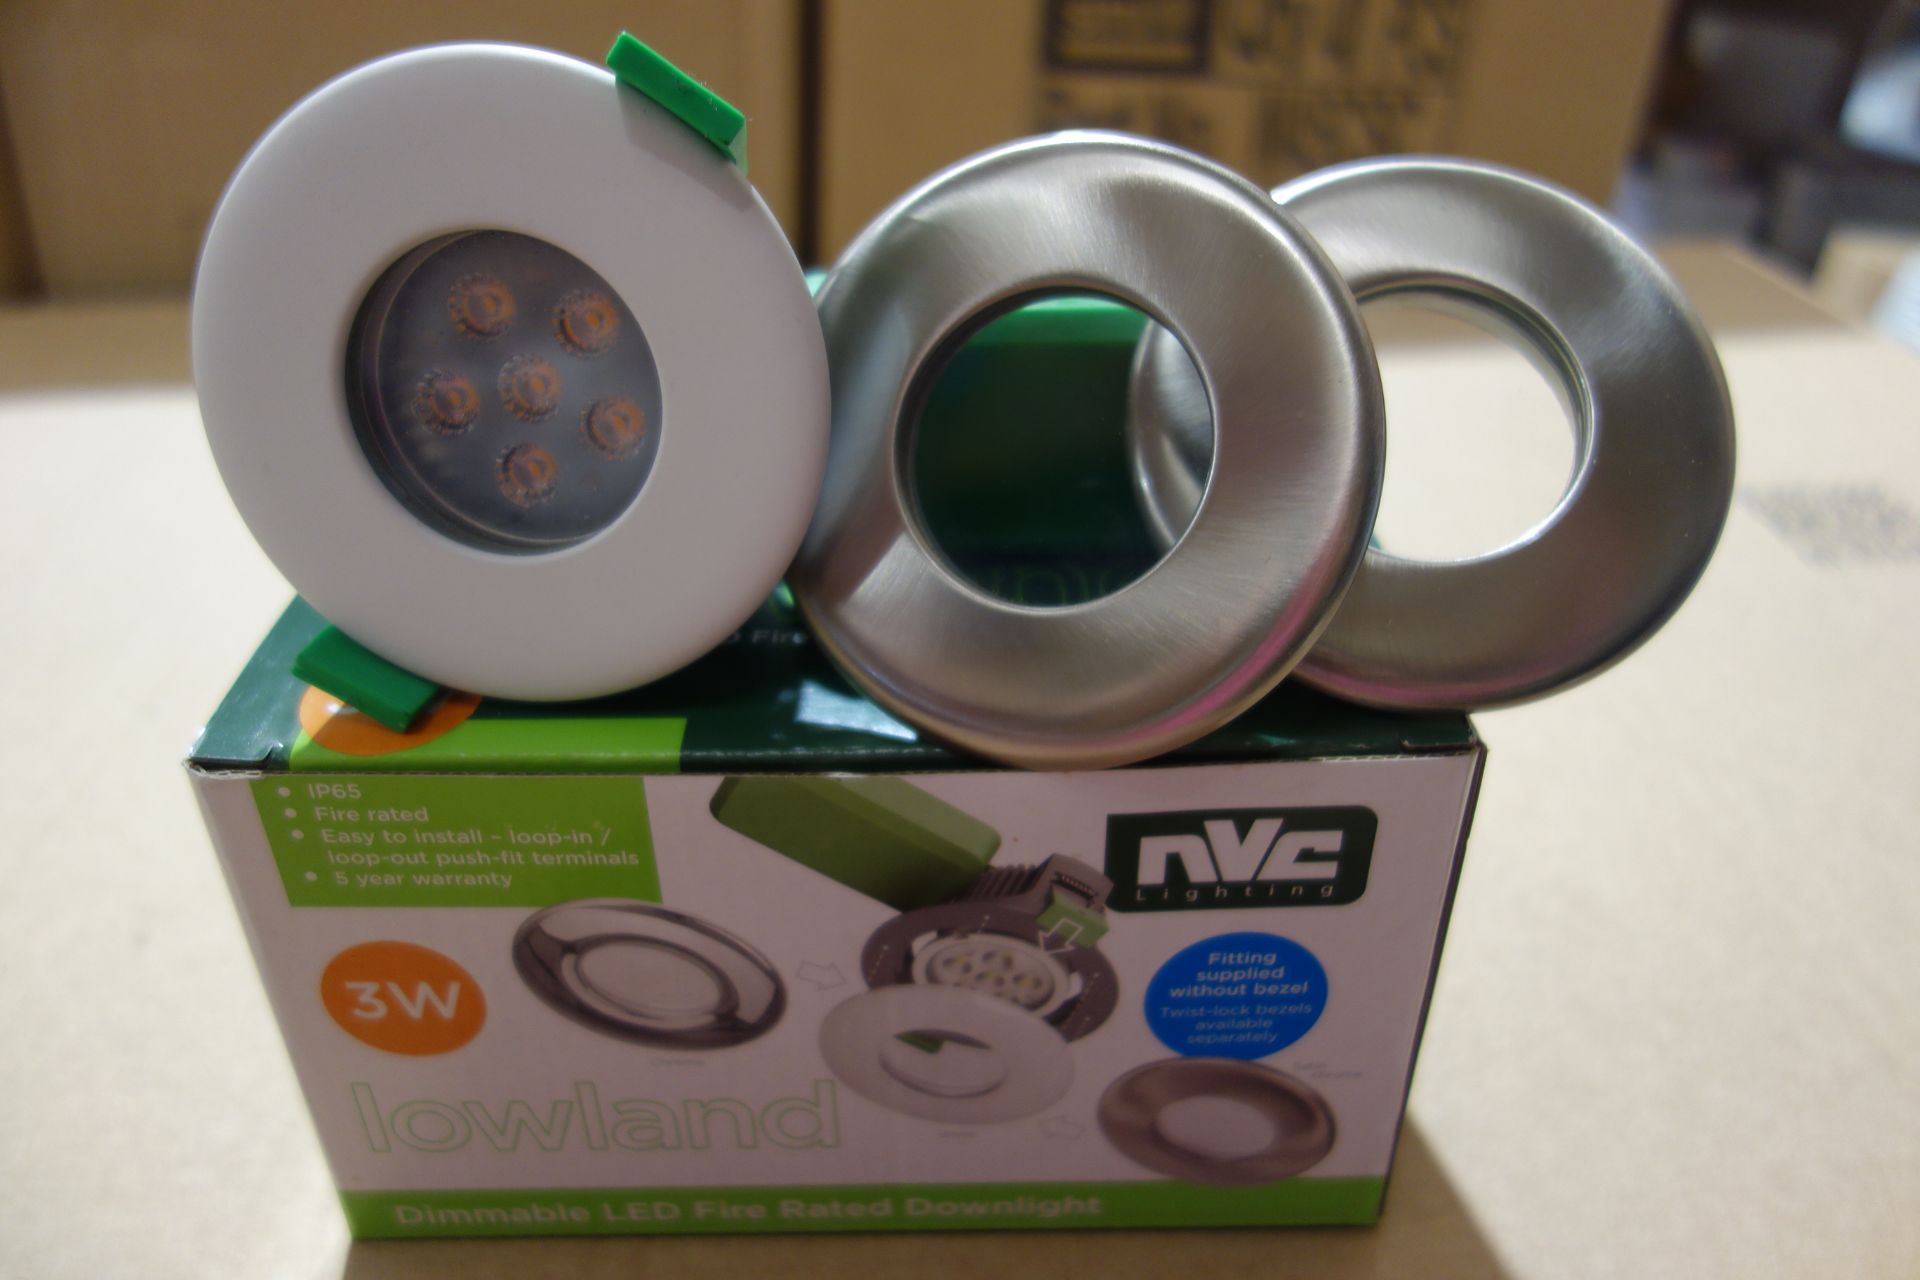 40 X NVC NLW3/MD/830 Lowland 3W LED Fire Rated Dimmable Downlights C/W Satin Chrome + White Bezels